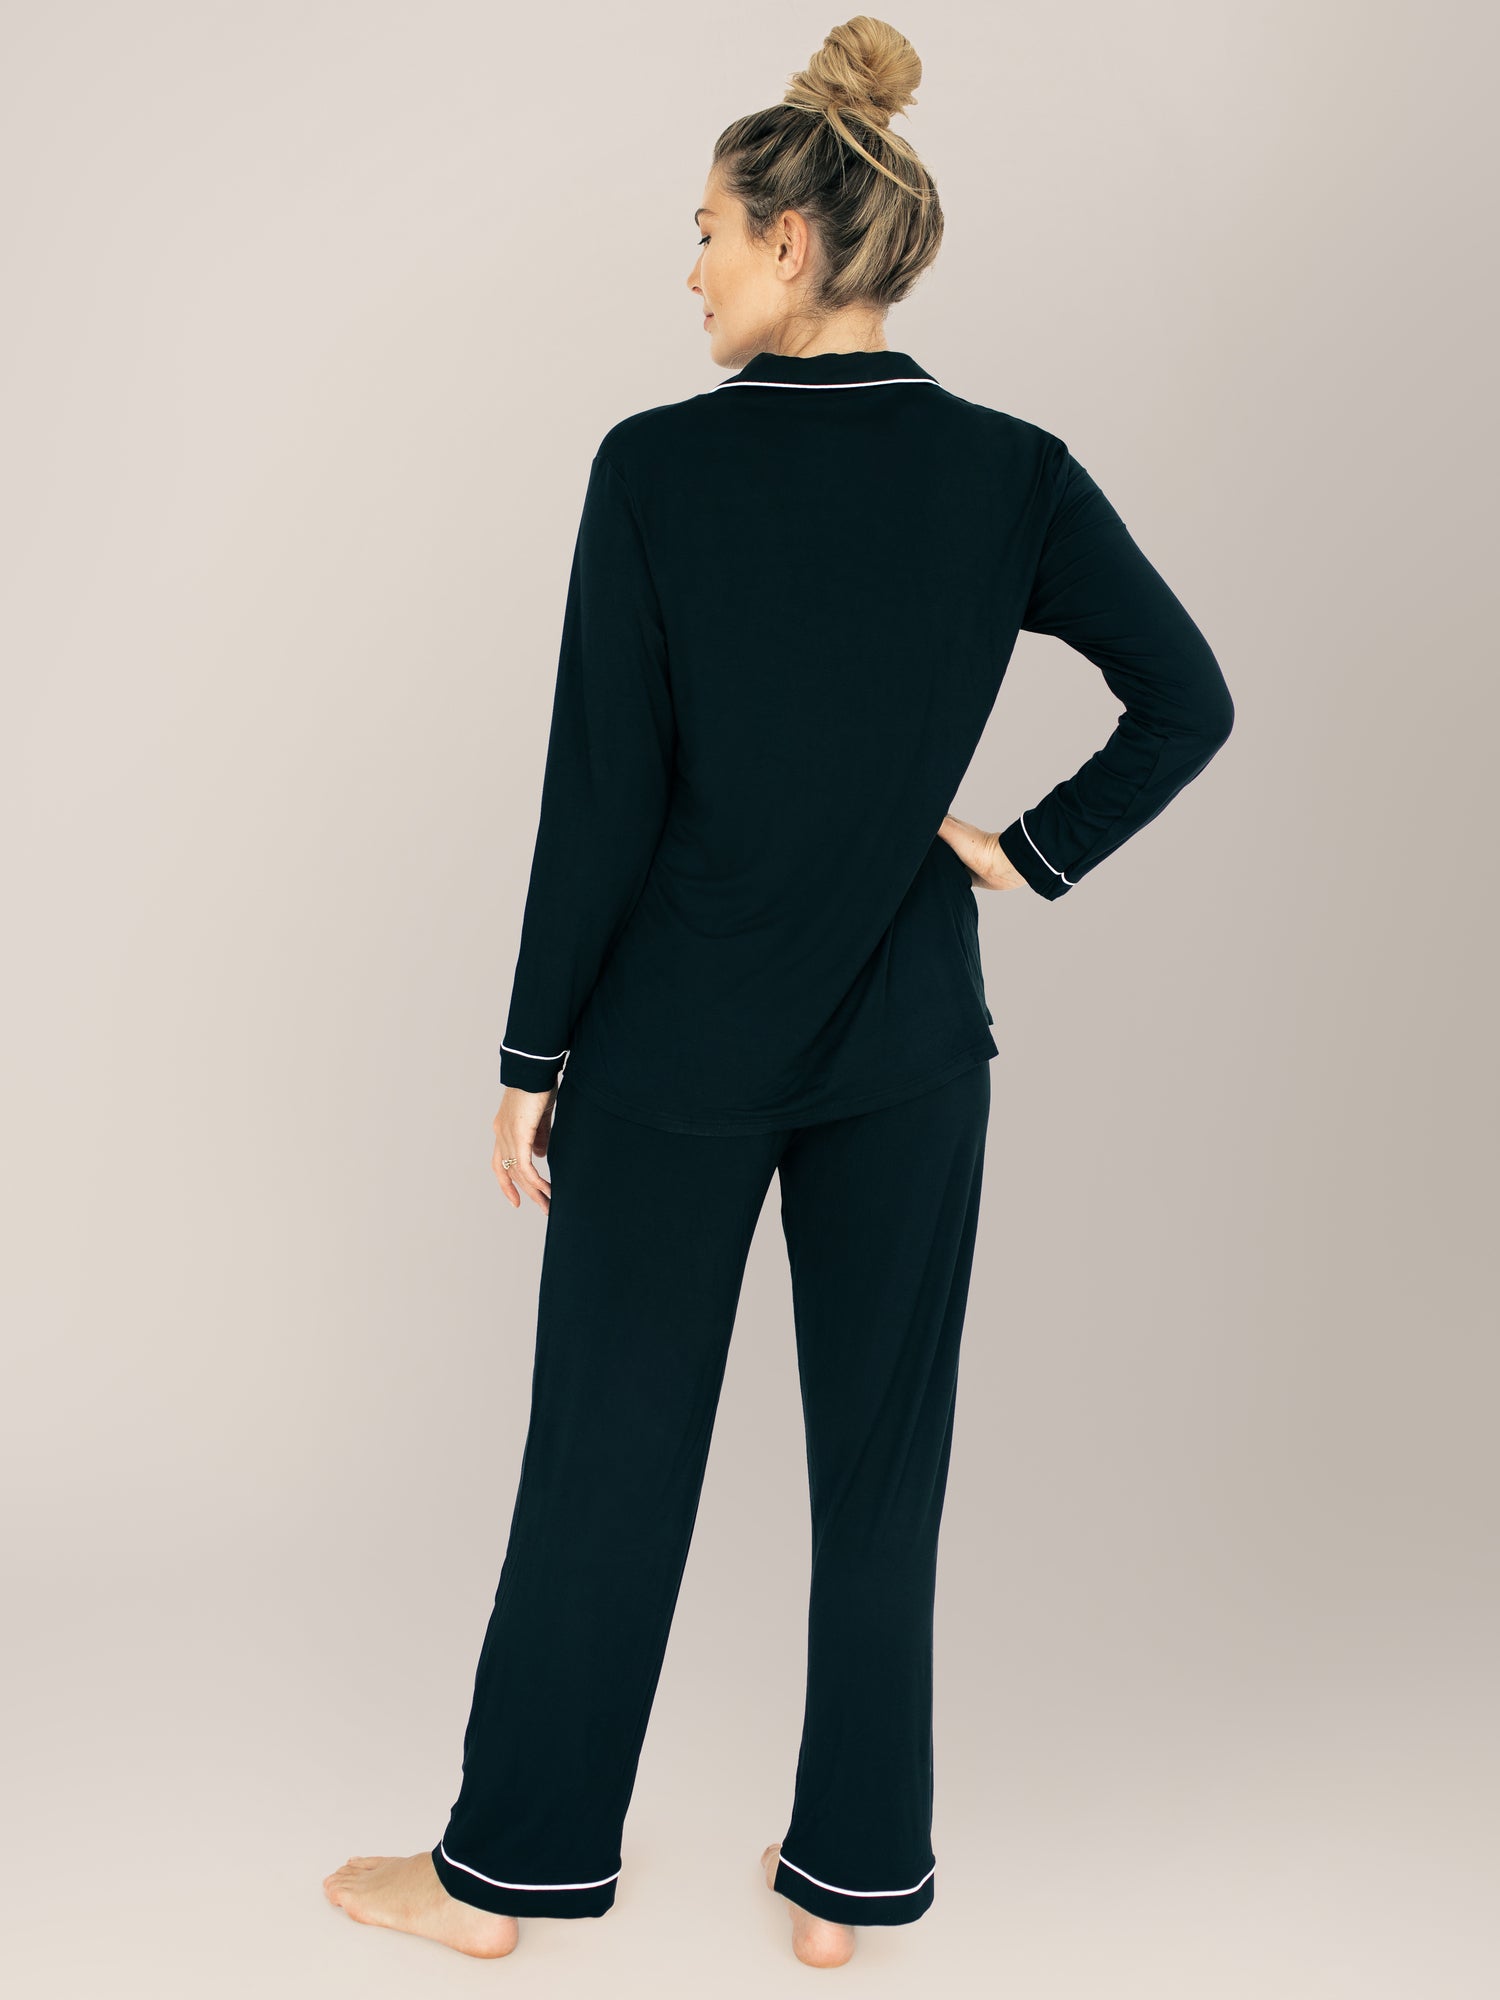 Back view of a model wearing the Clea Bamboo Long Sleeve Pajama Set in Black